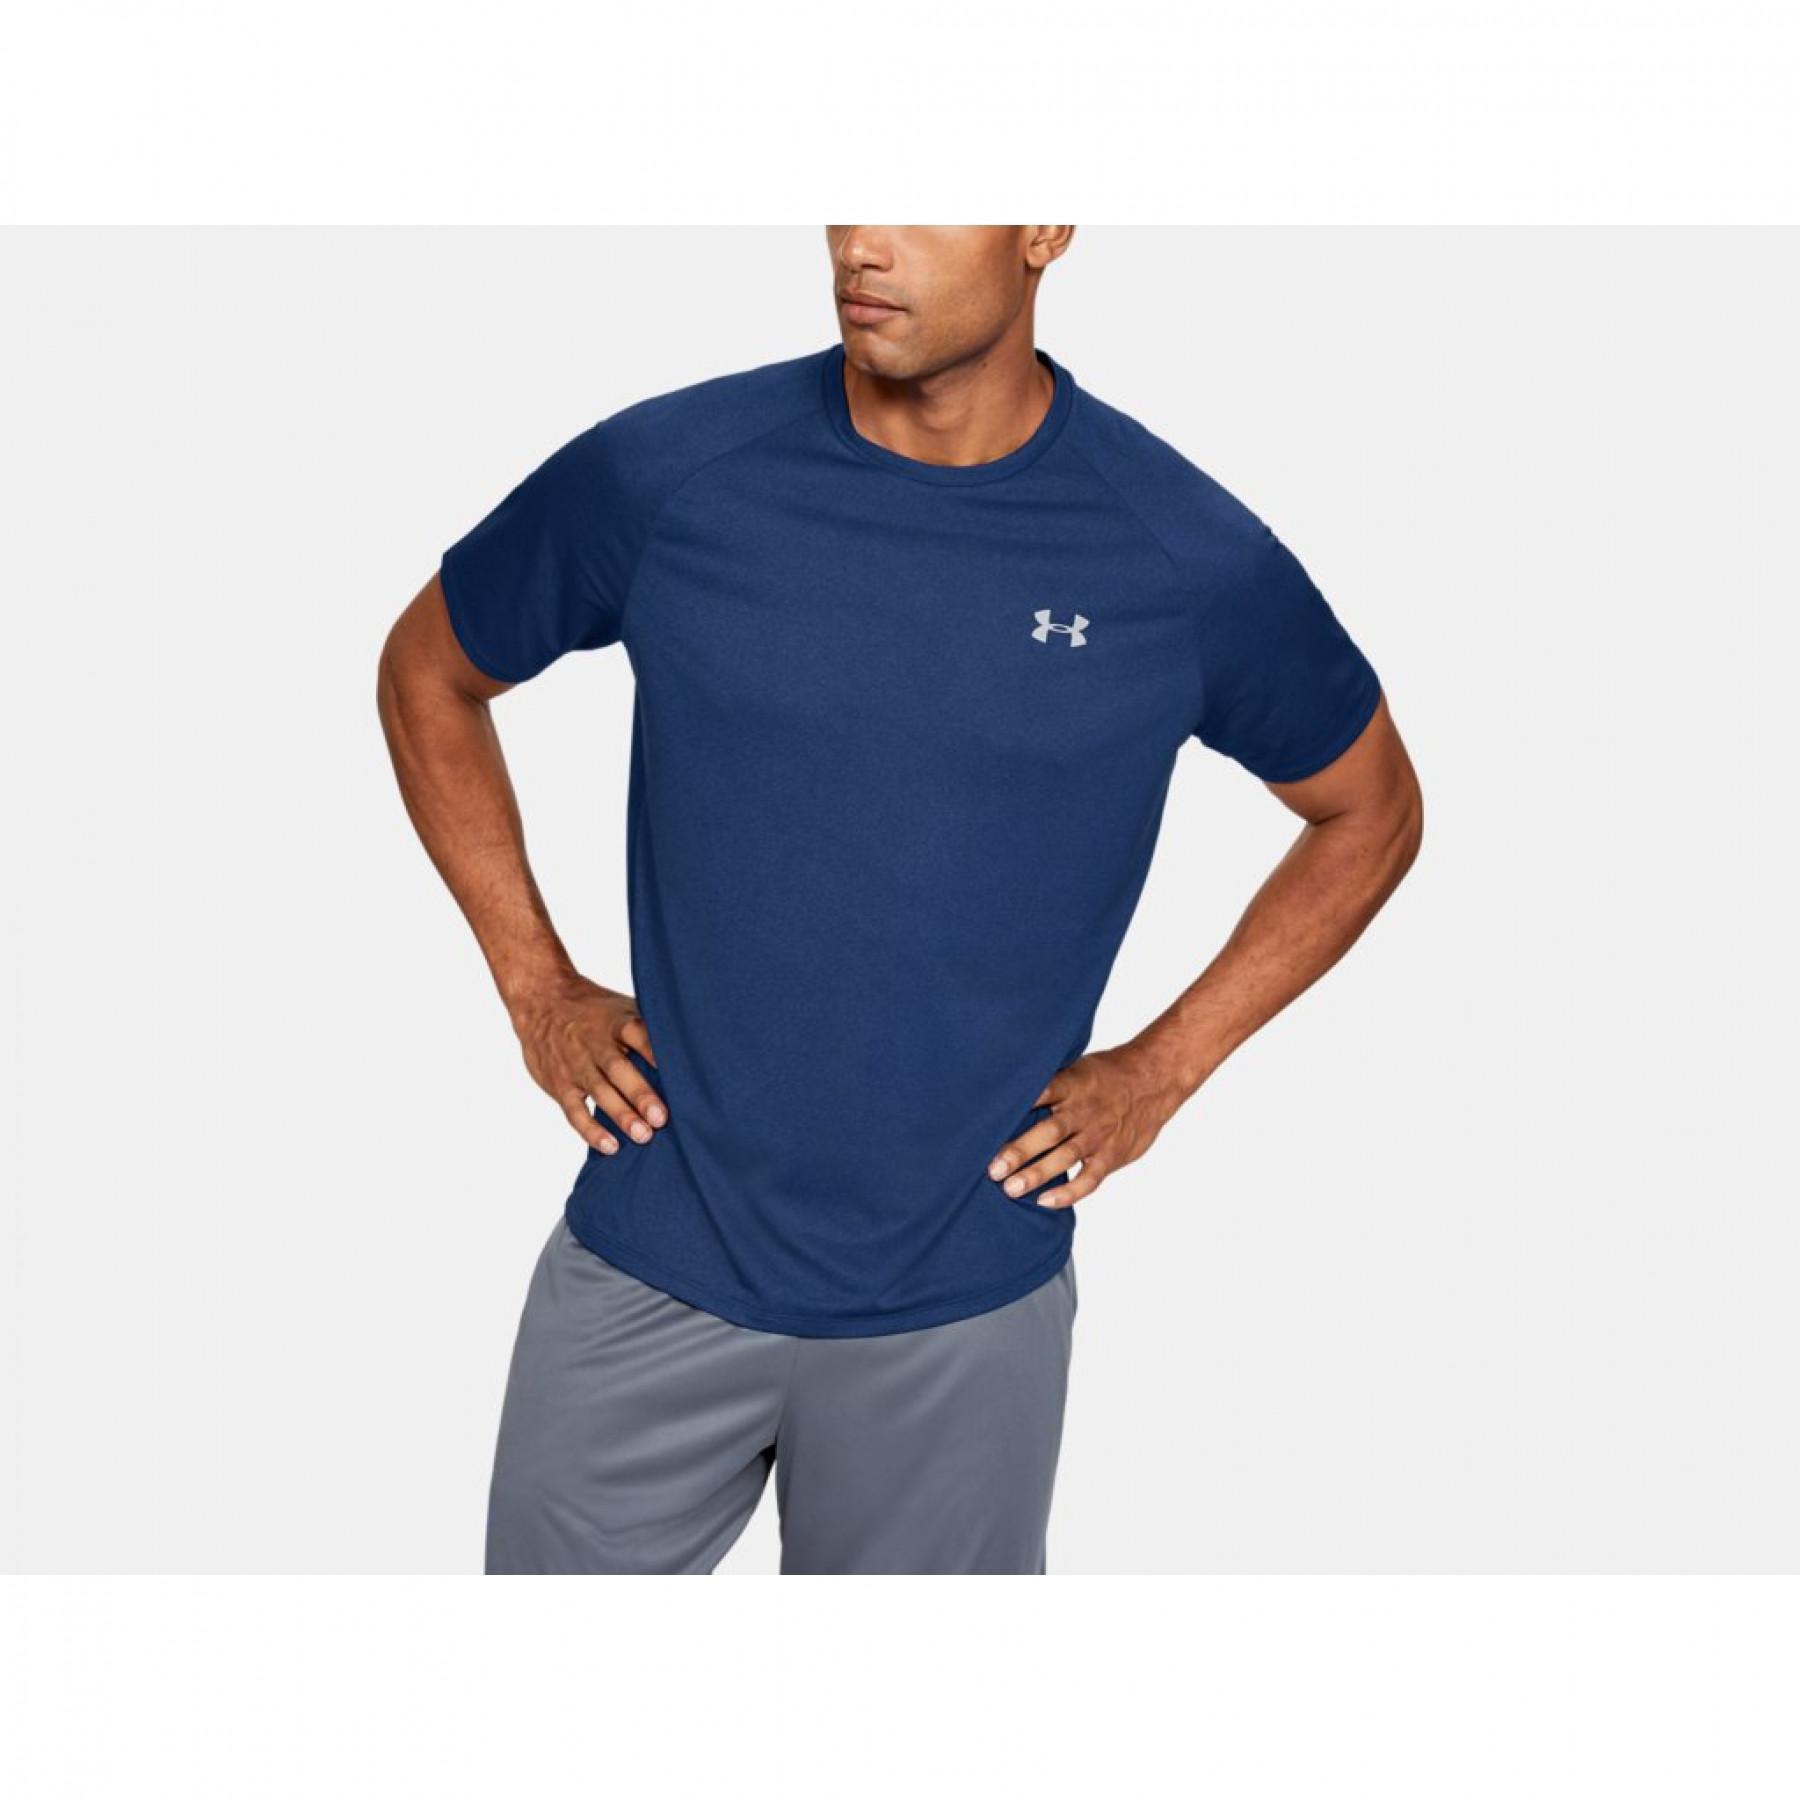 Under Armour Training Tech 2.0 t-shirt in navy